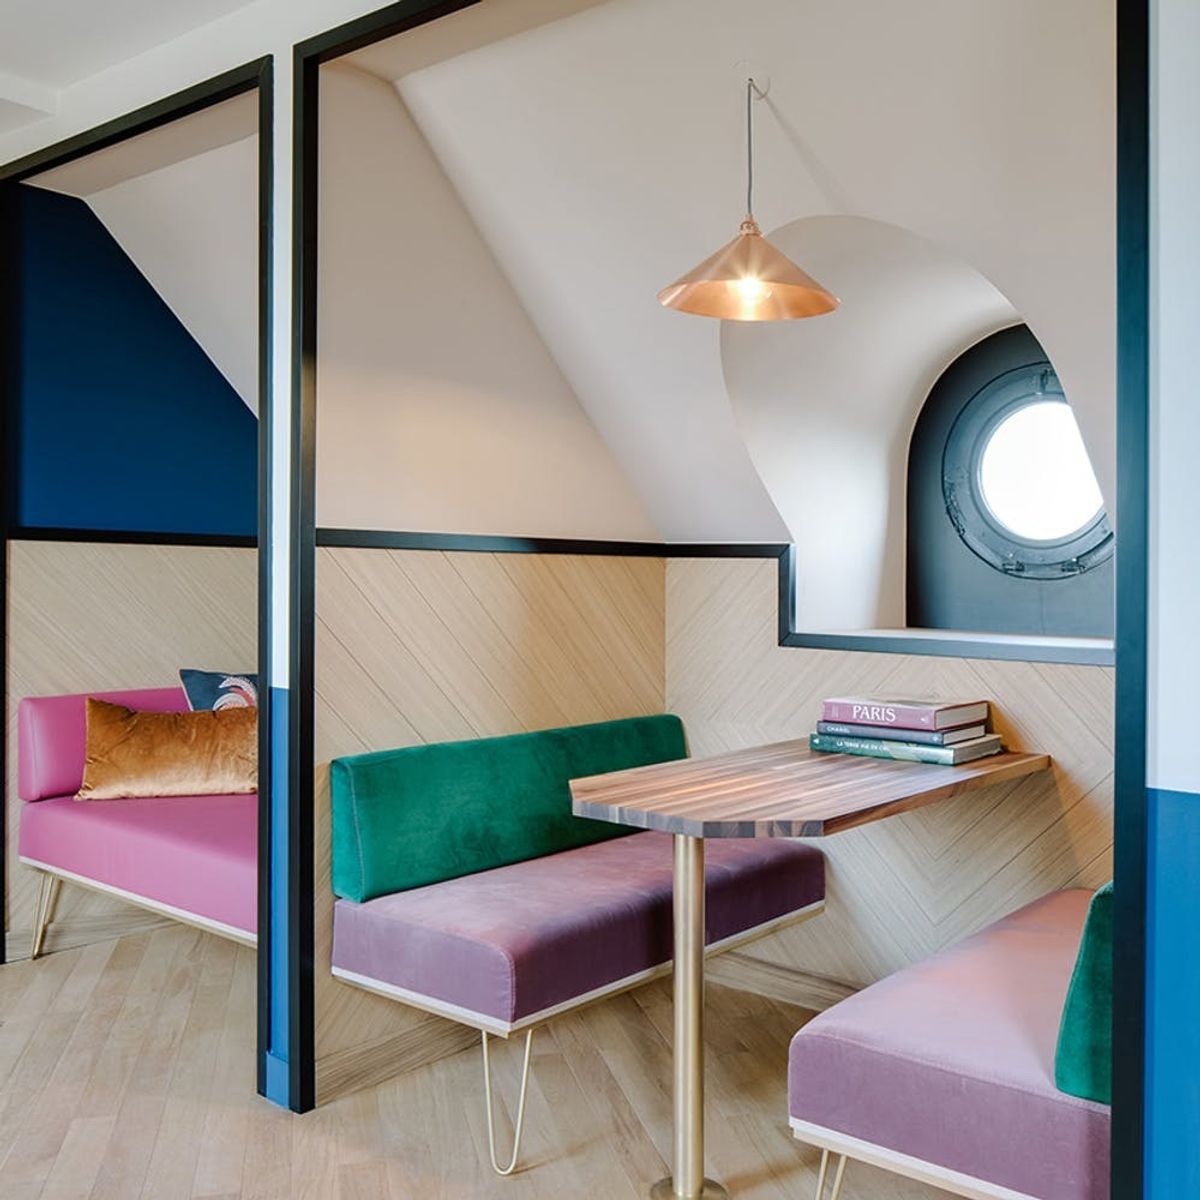 Let WeWork’s New Paris Office Inspire Your Workplace Decor